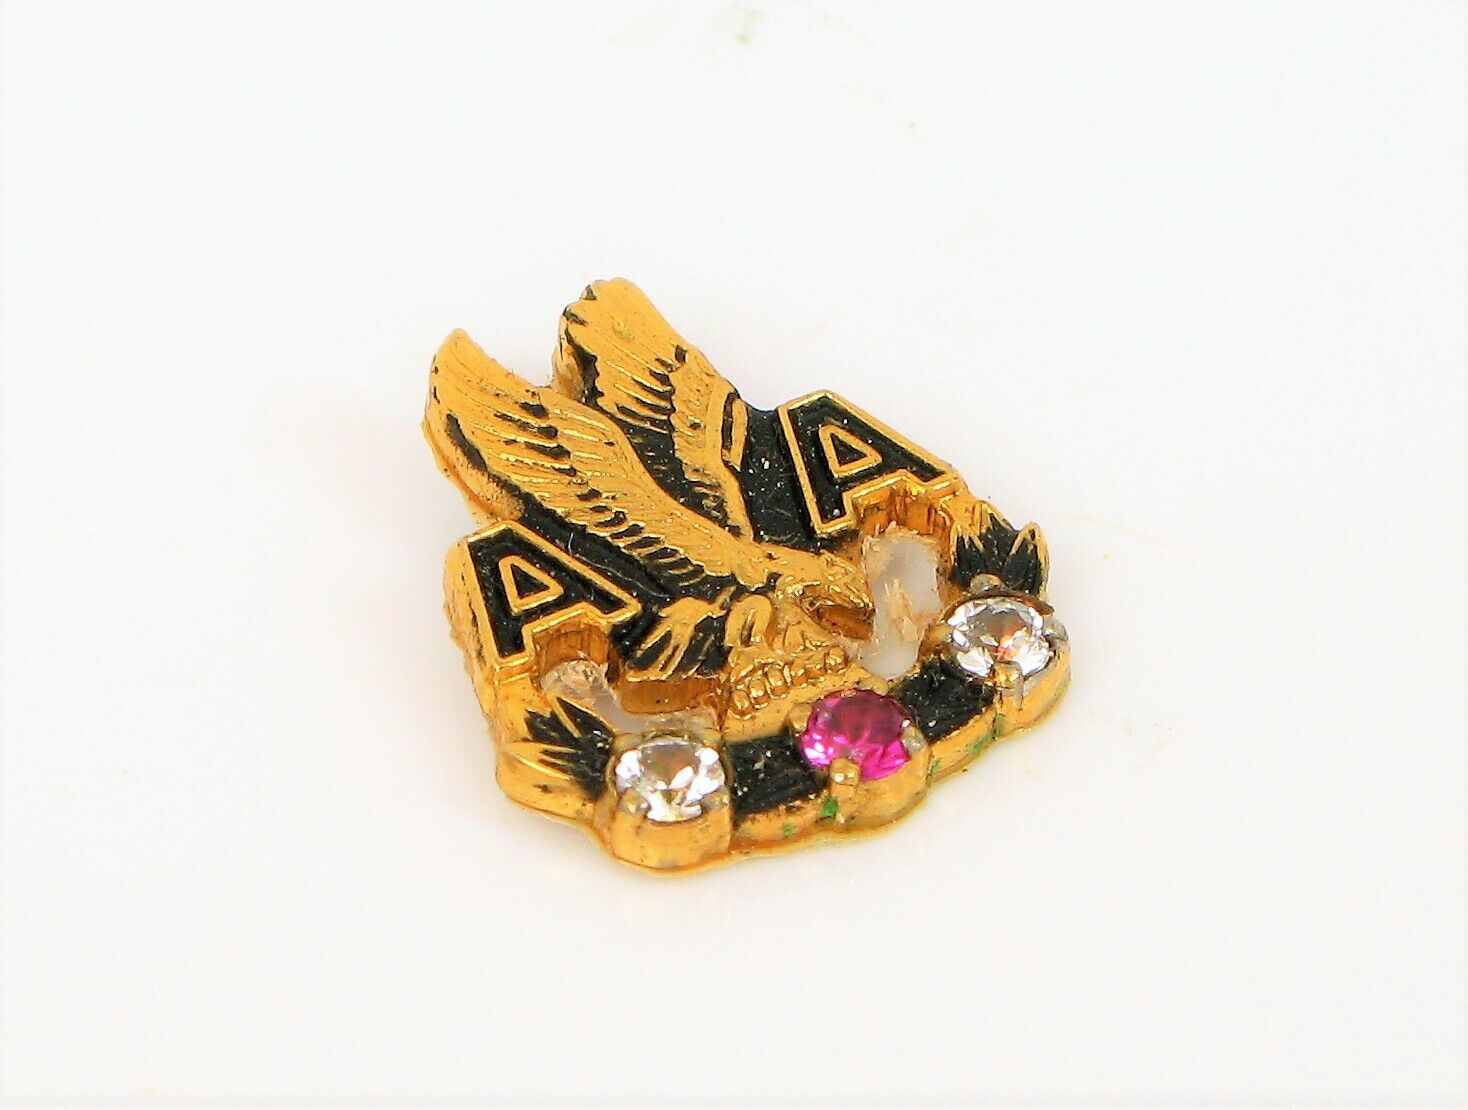 VTG AMERICAN AIRLINES EMPLOYEE AWARD EAGLE EMBLEM GOLD TONE WHT SAPPHIRE 25 YEAR